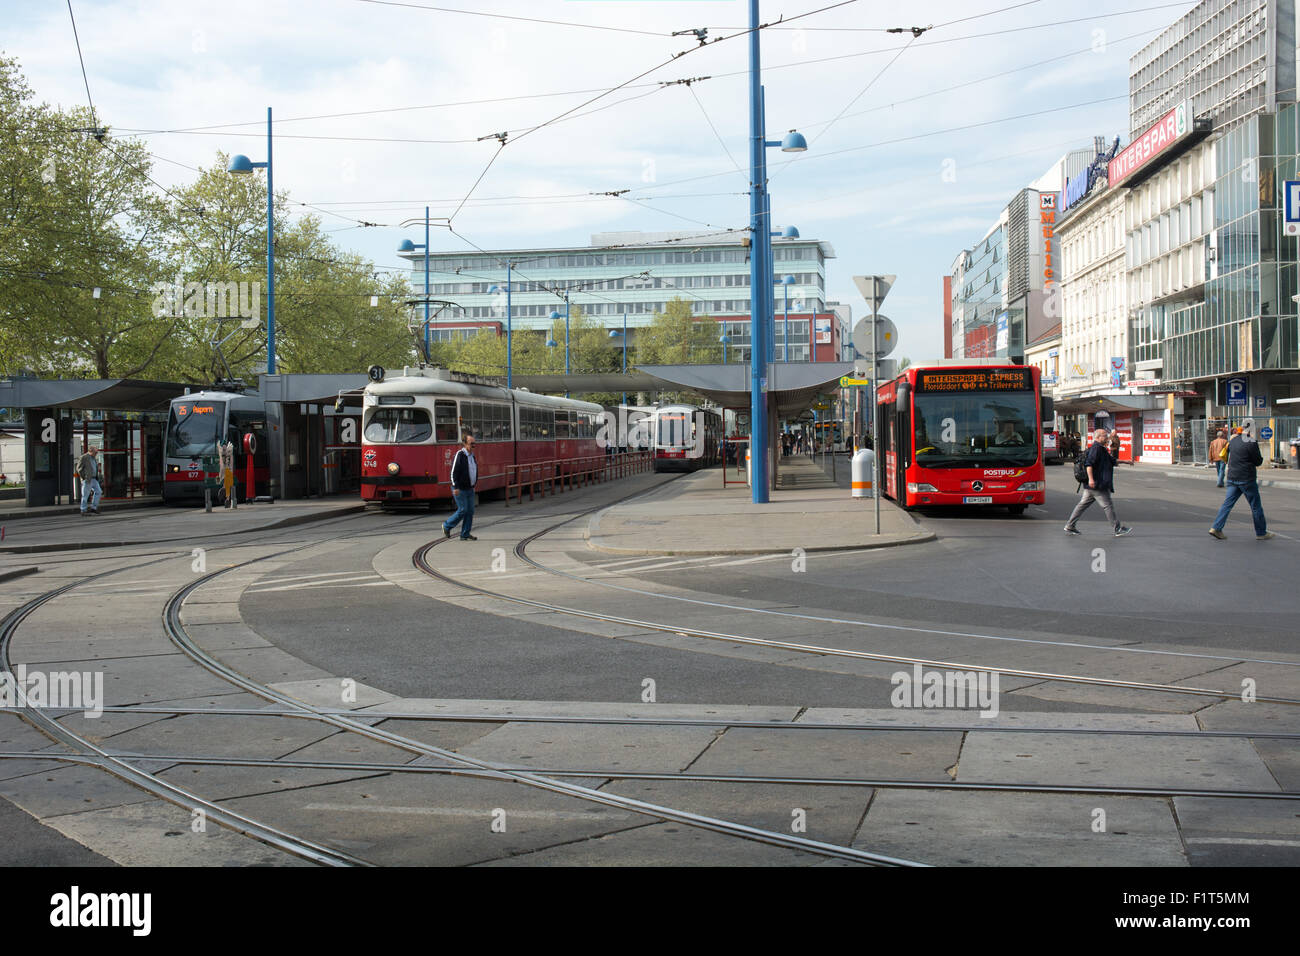 The Floridsdorf transport interchange between trains, buses and trams to the north of Vienna Stock Photo